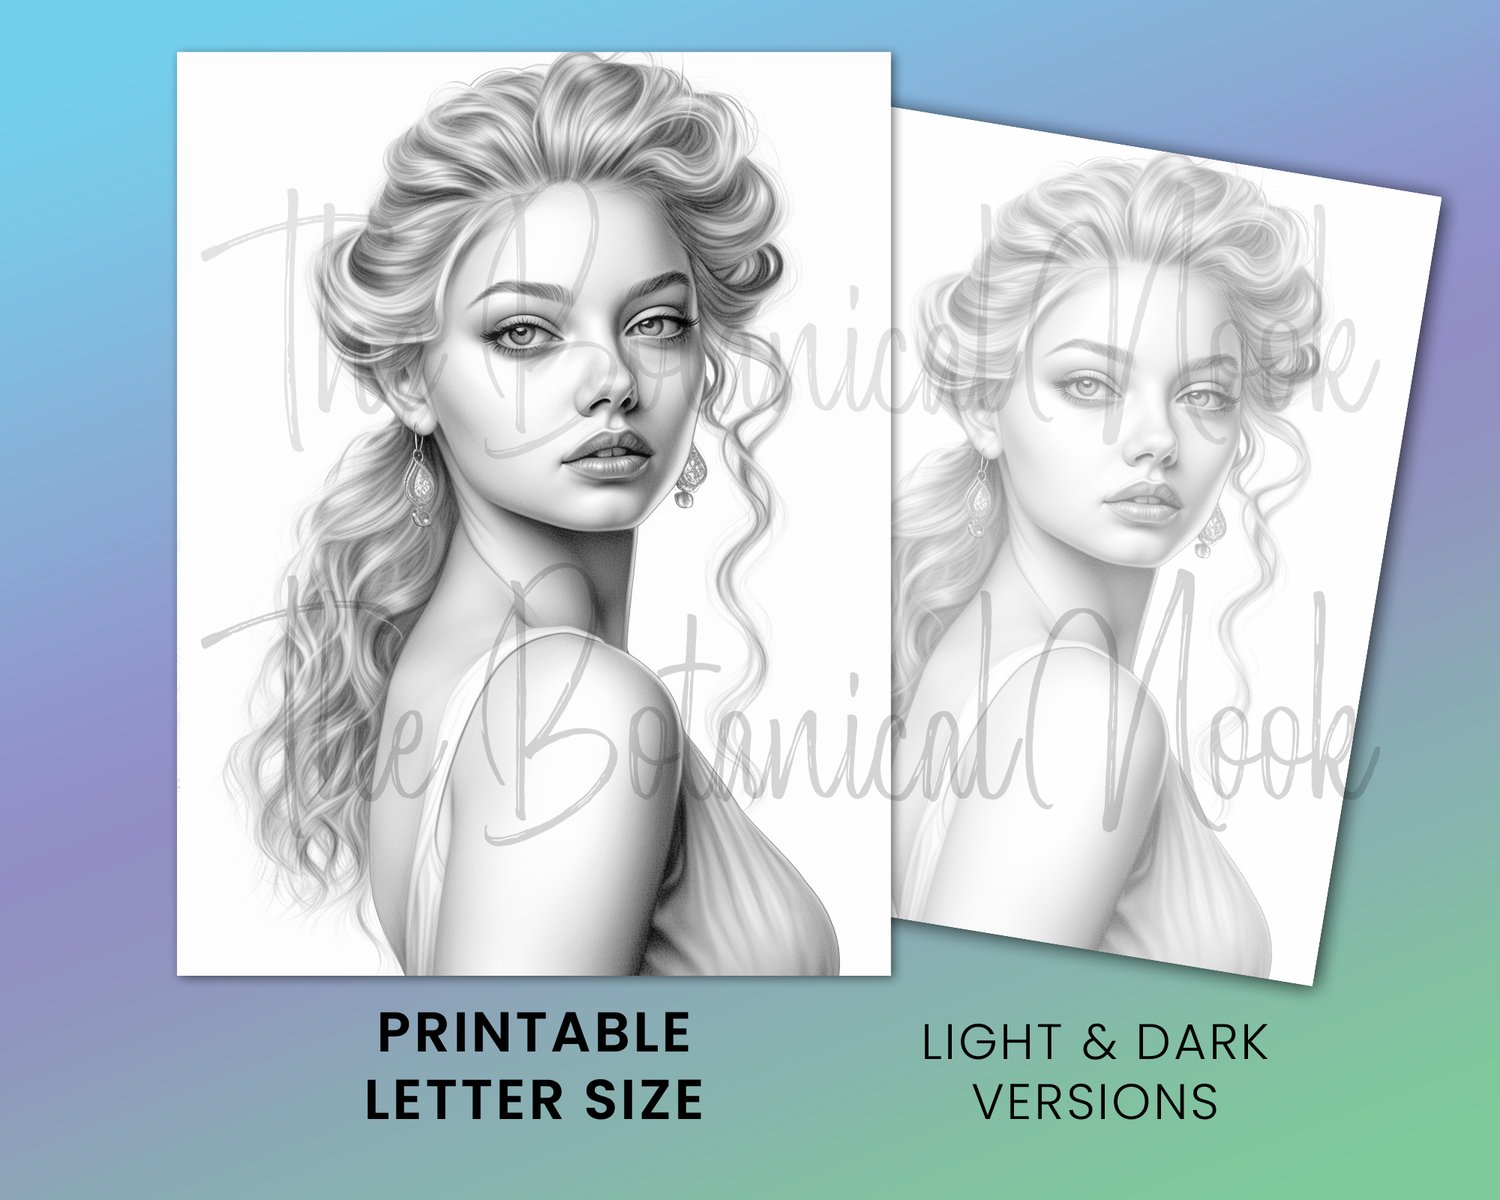 Sets of Coloring Pages, Beauties, Download Grayscale Portraits